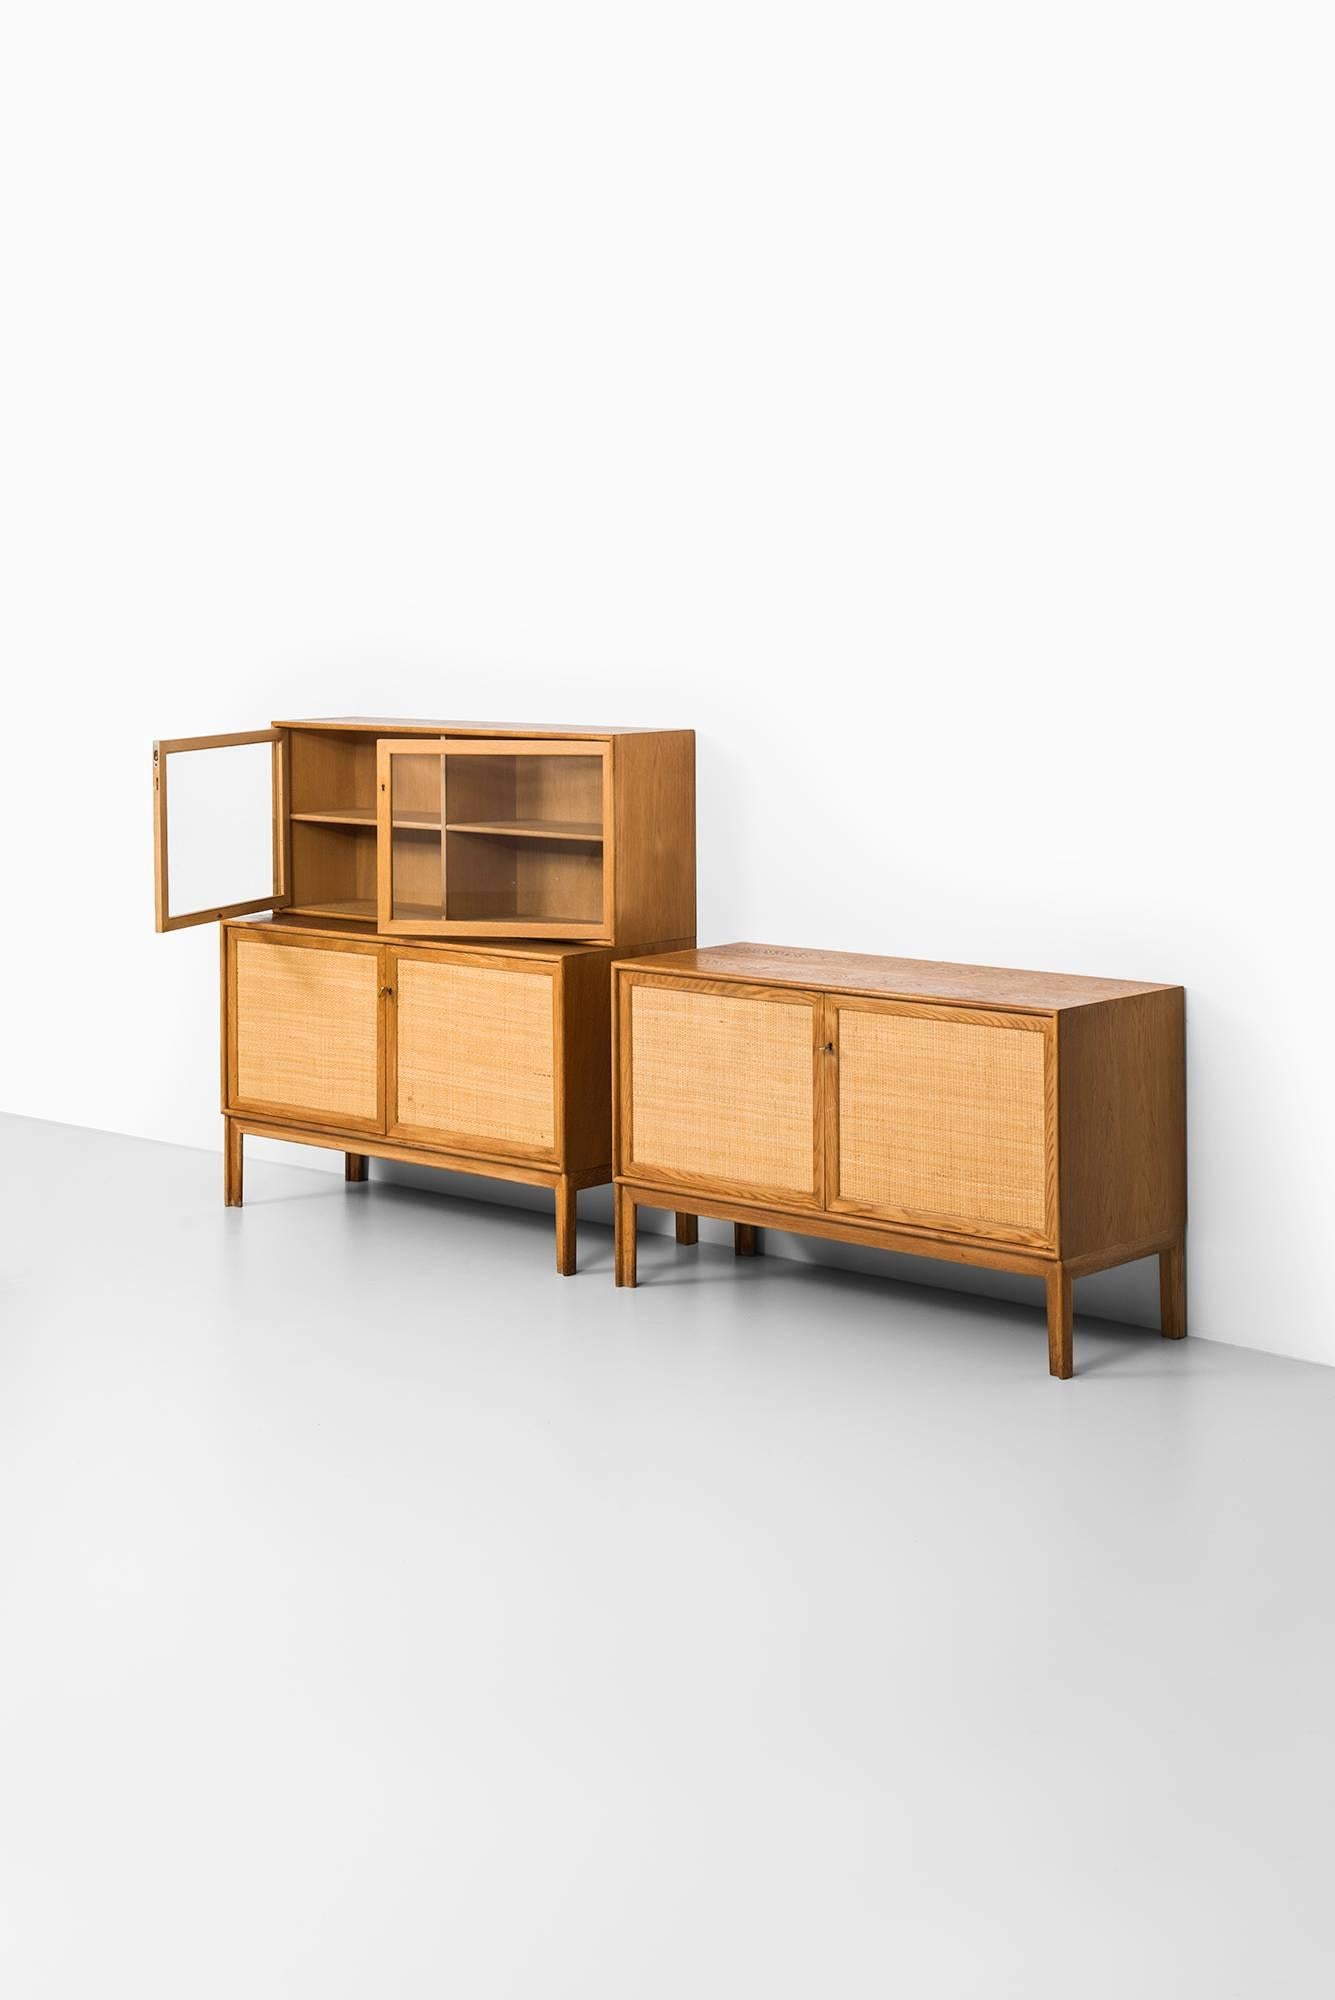 Alf Svensson Sideboards with Glass Cabinet by BjäSta in Sweden 1